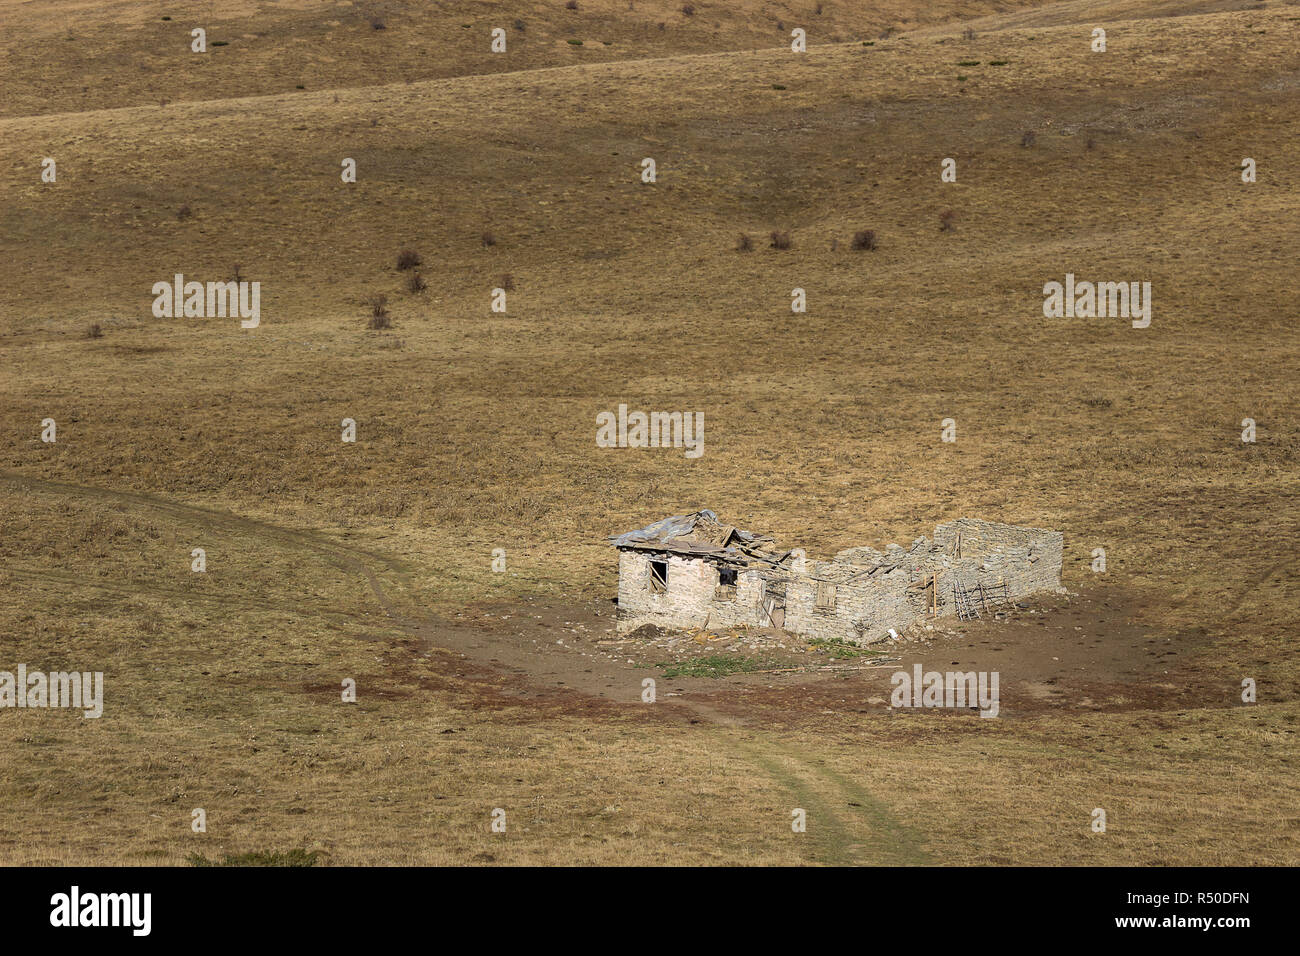 Sad, ruined, abandoned animal farm on the endless grassy highlands of Old mountain Stock Photo